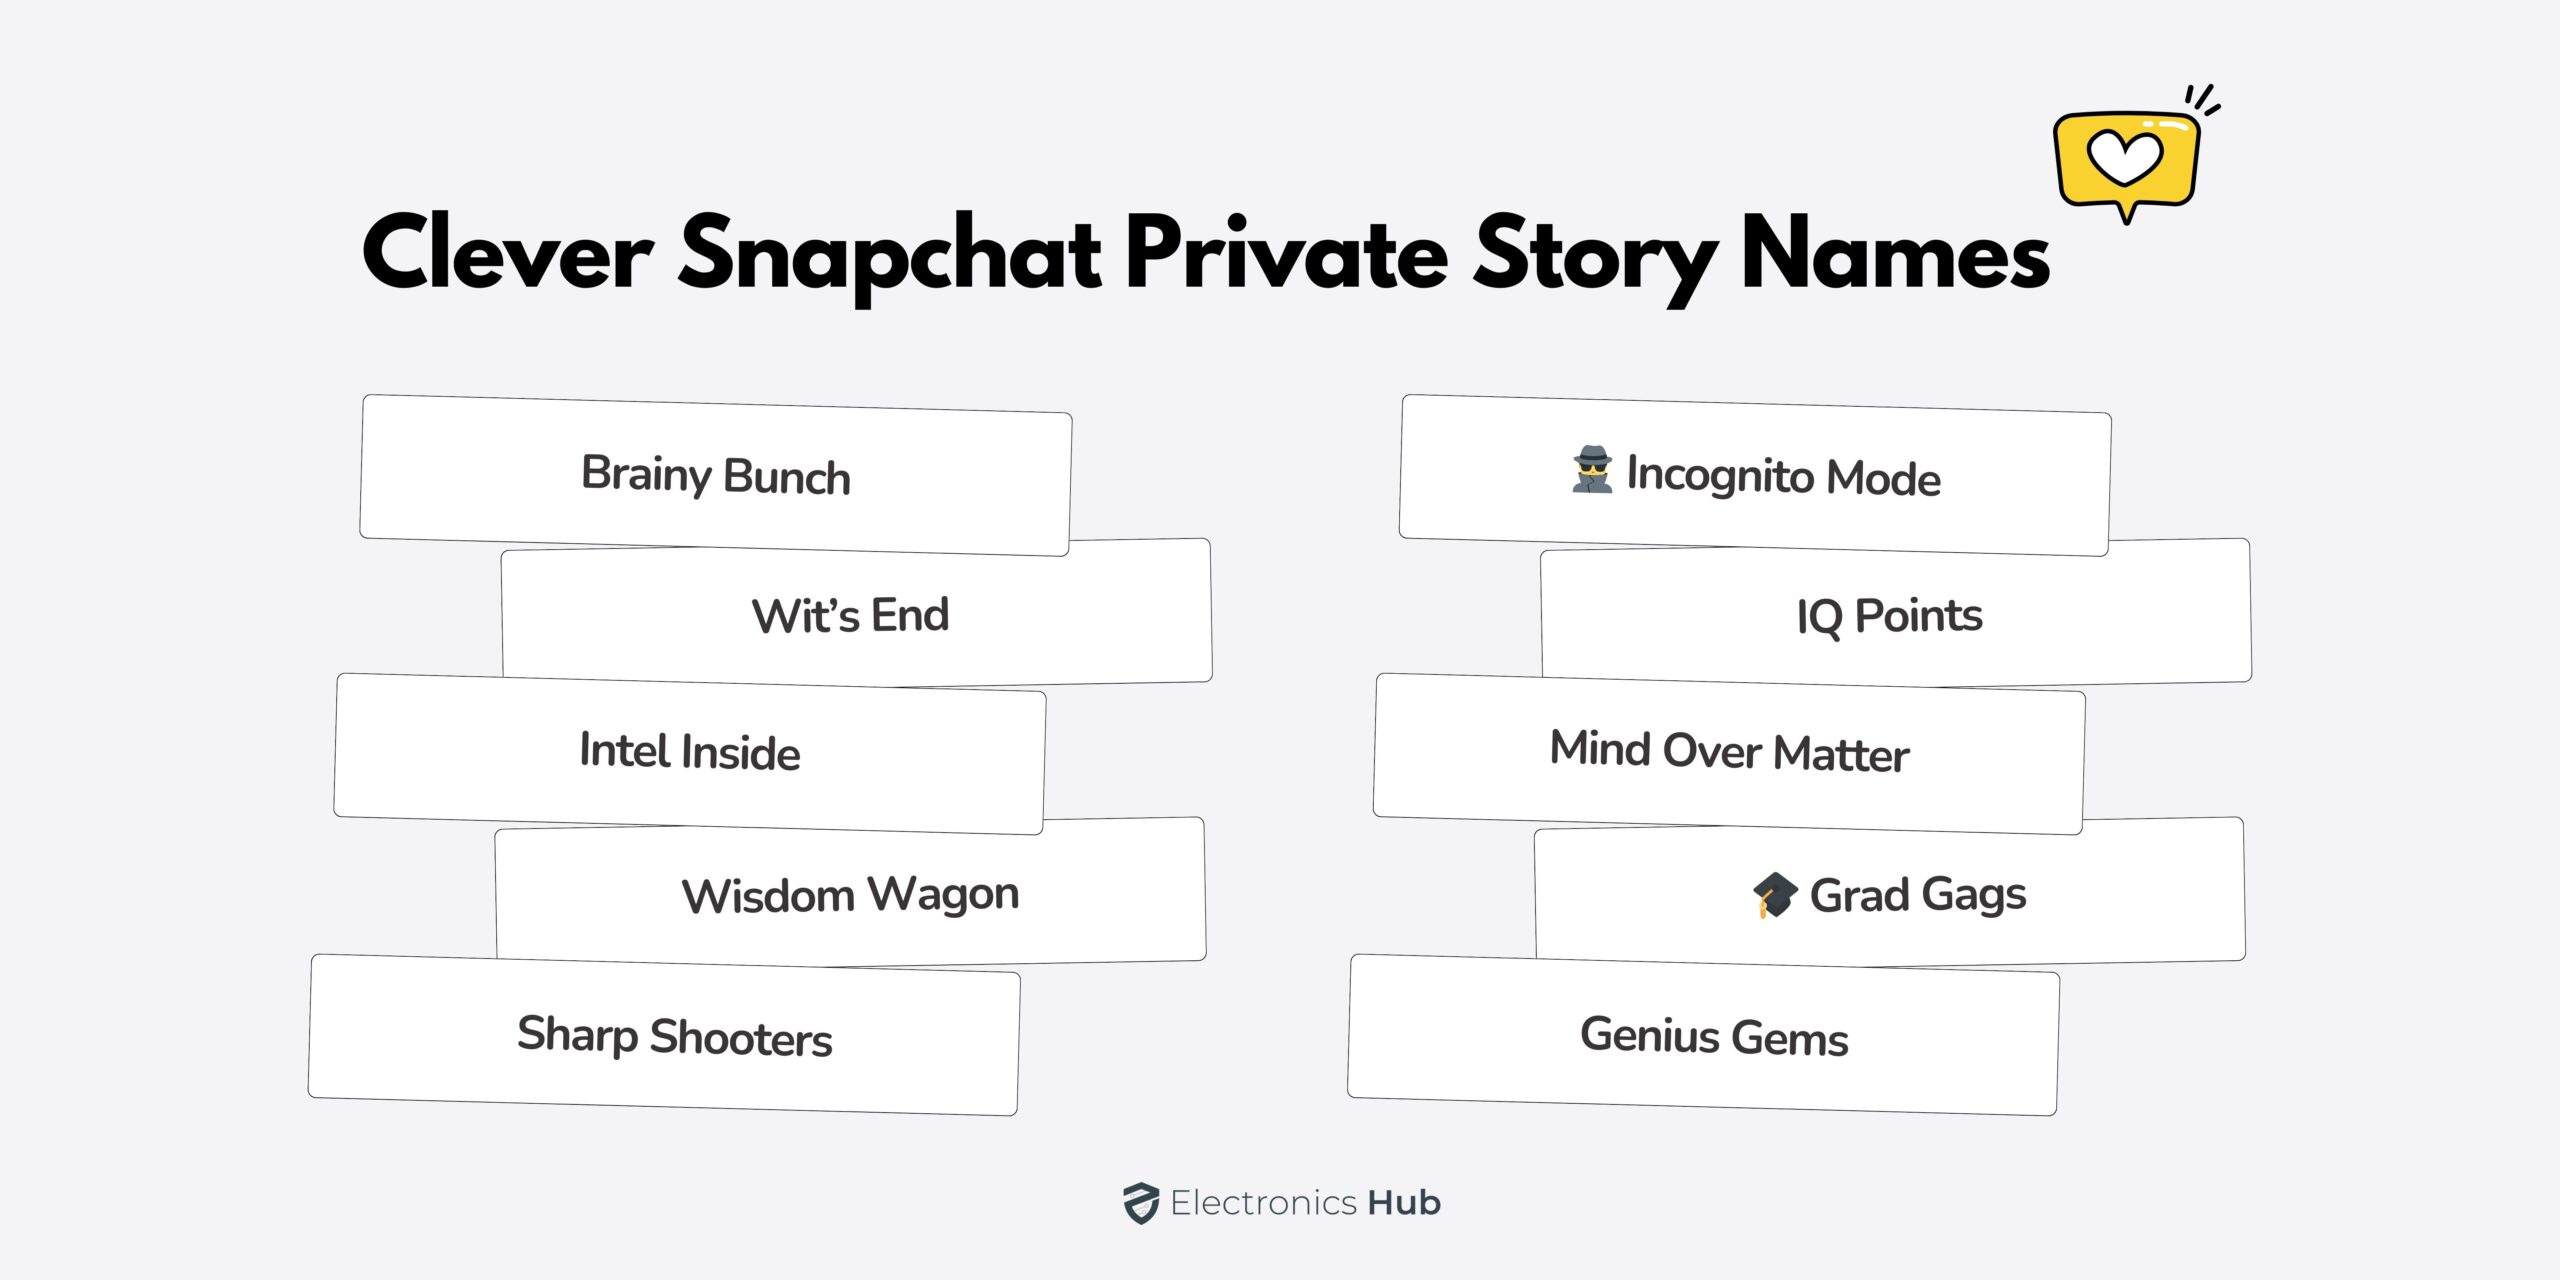 Clever Snapchat Private Story Names